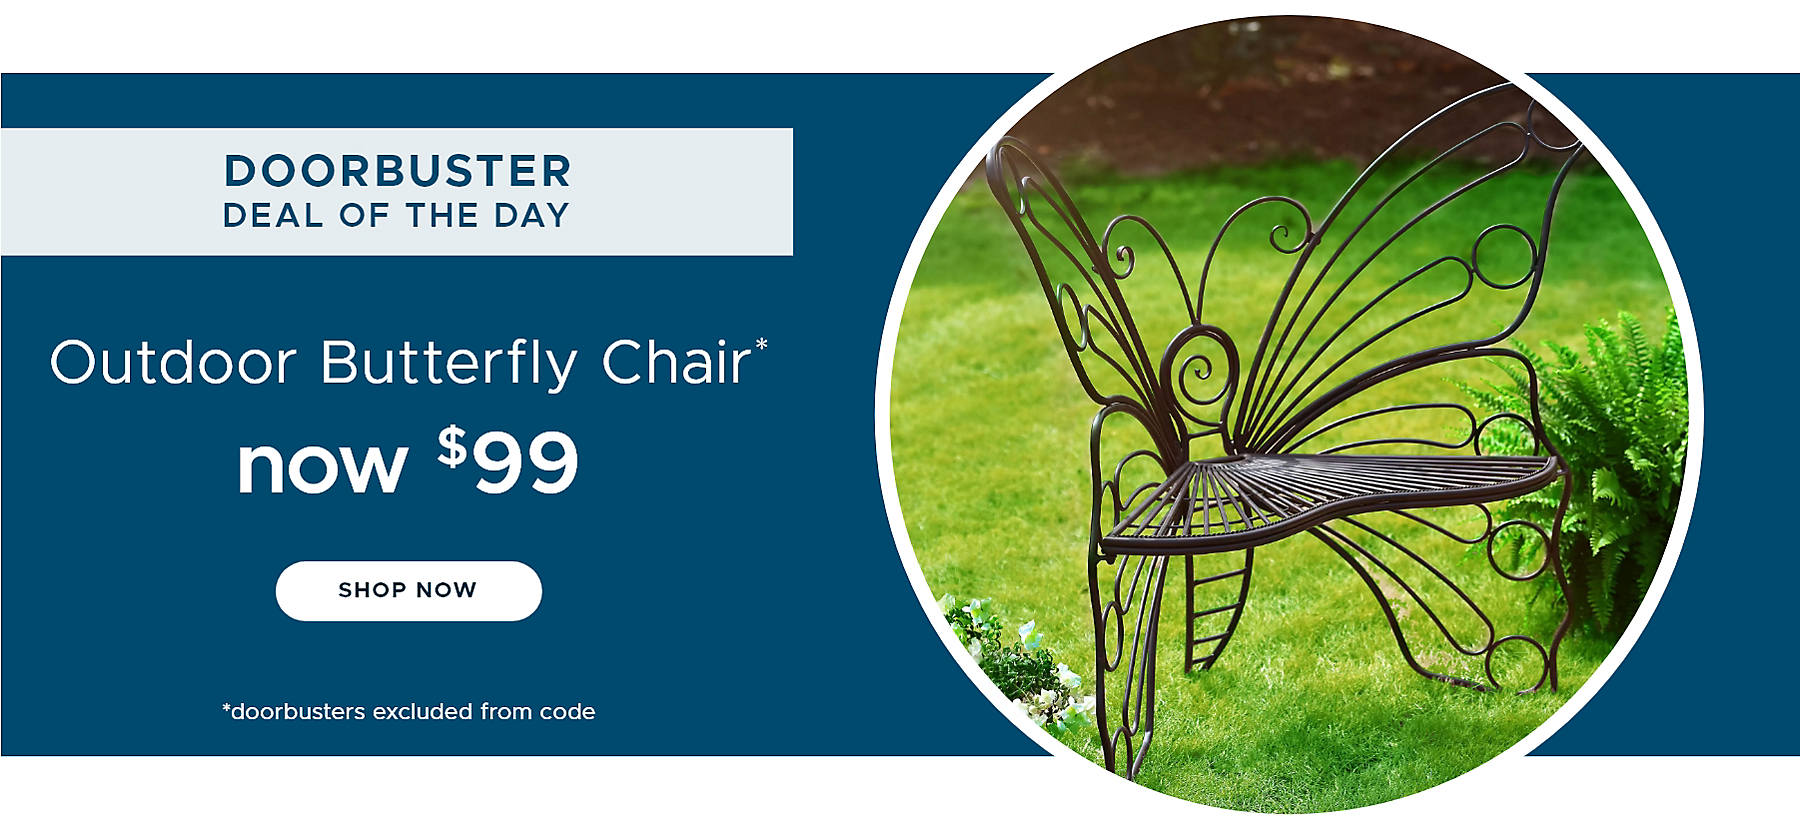 Doorbuster Deal of the Day Outdoor Butterfly Chair* now $99 shop now *doorbusters excluded from code